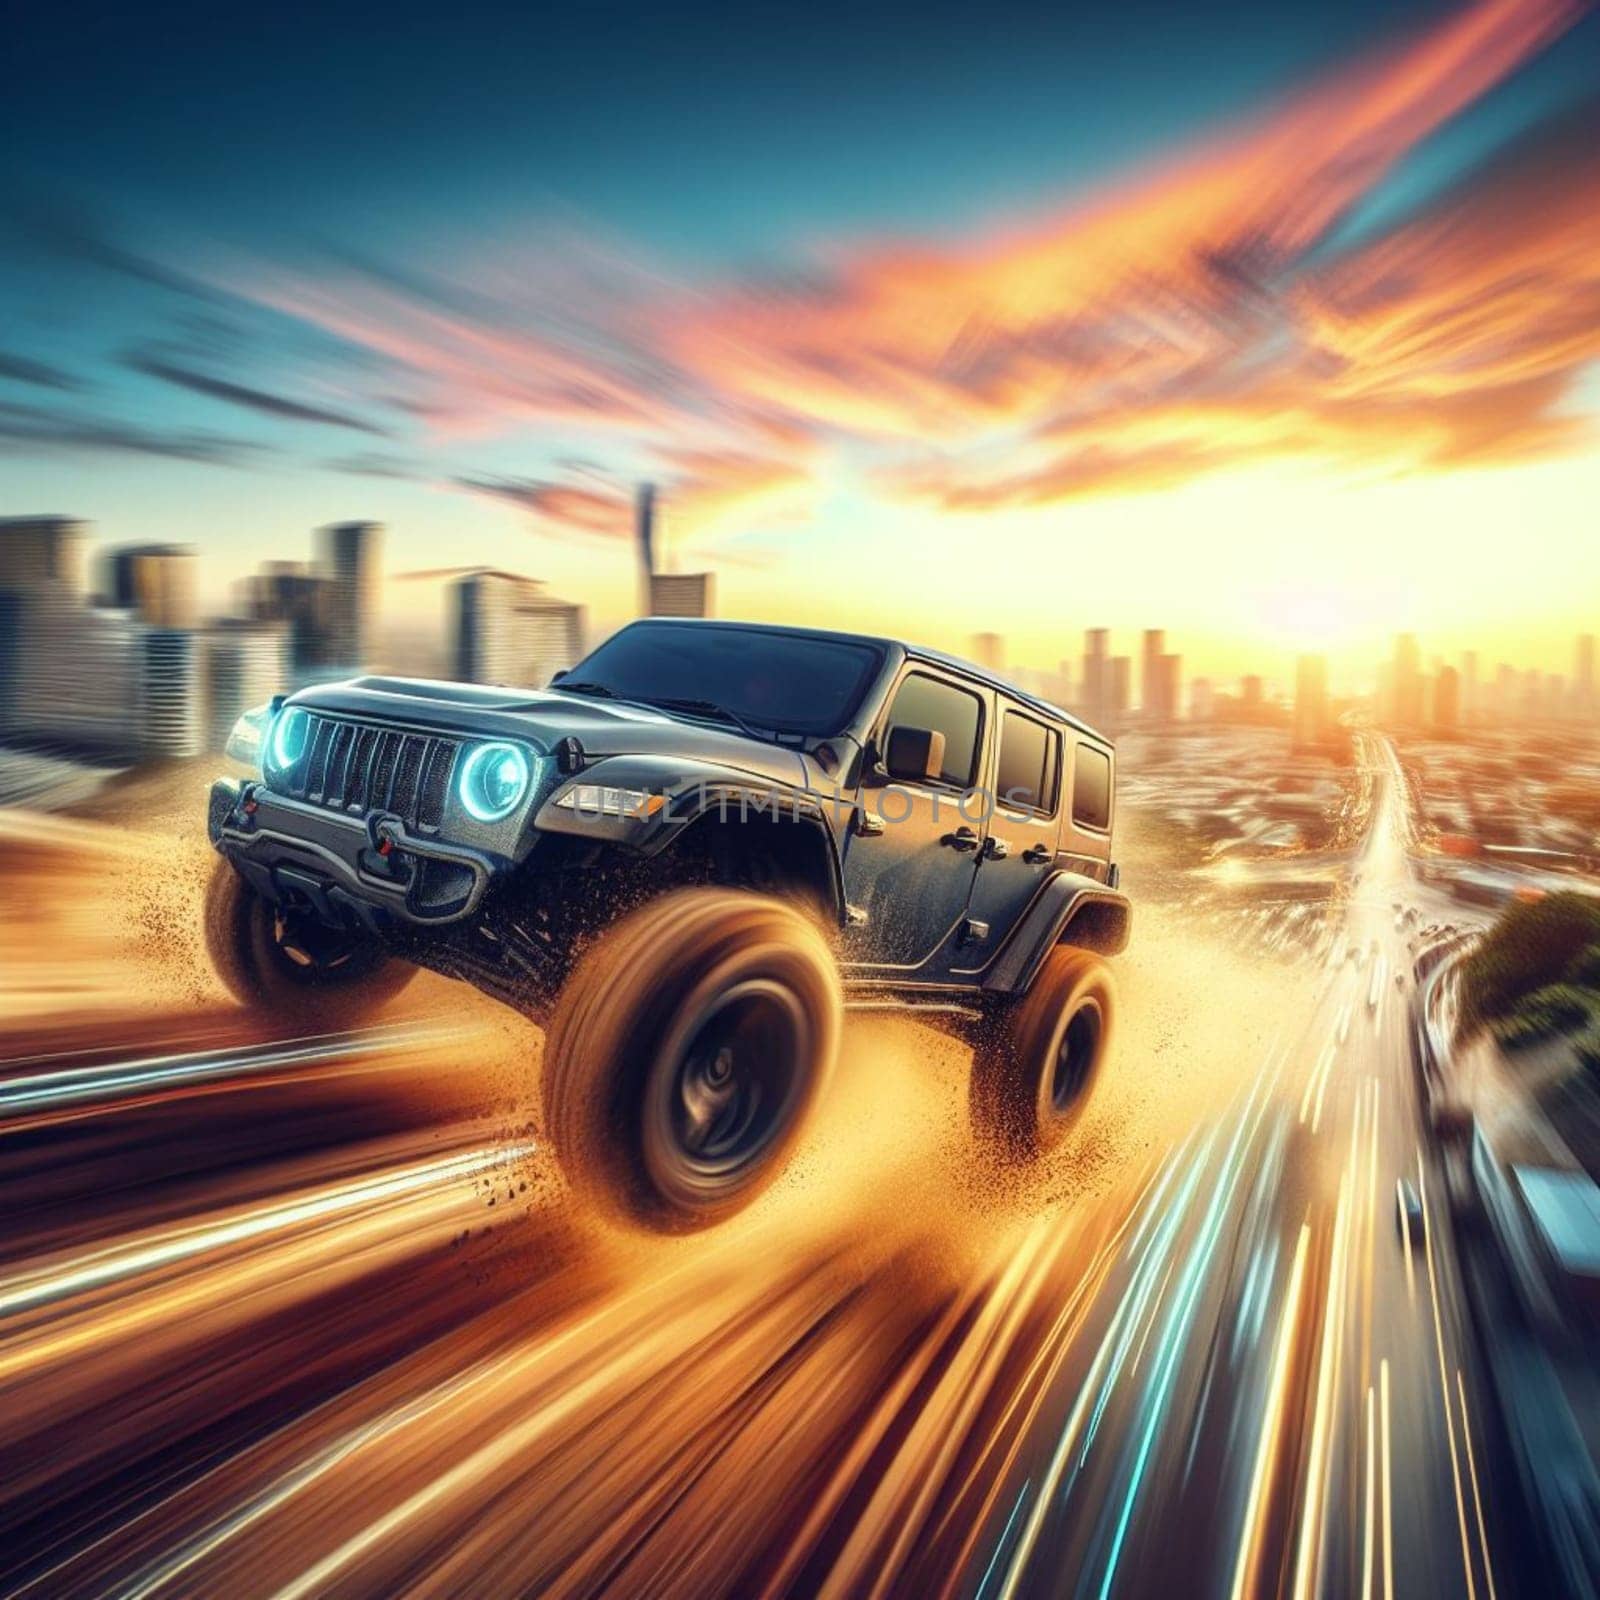 suv crossover go fast in city suburbs, sunrise, motion blur, golden hour, off road by verbano